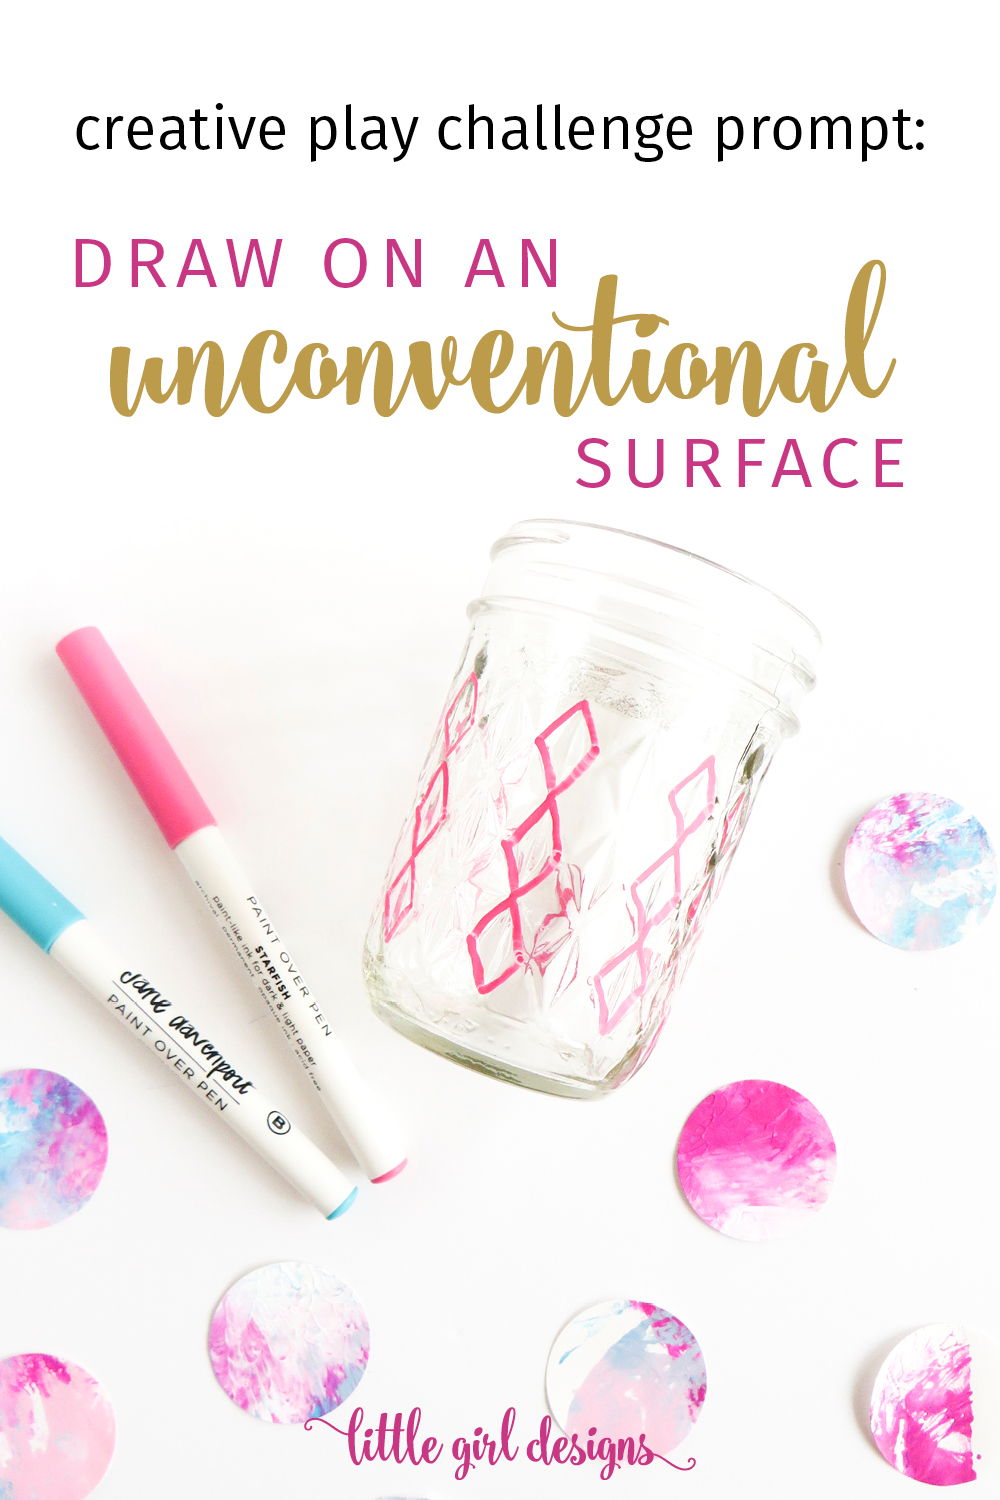 Challenge yourself by doing this creative prompt to draw on an unconventional surface this week. Grab your paint pens, markers, pencils, and paint, and let's do this! (This is a great art activity for kids too!)